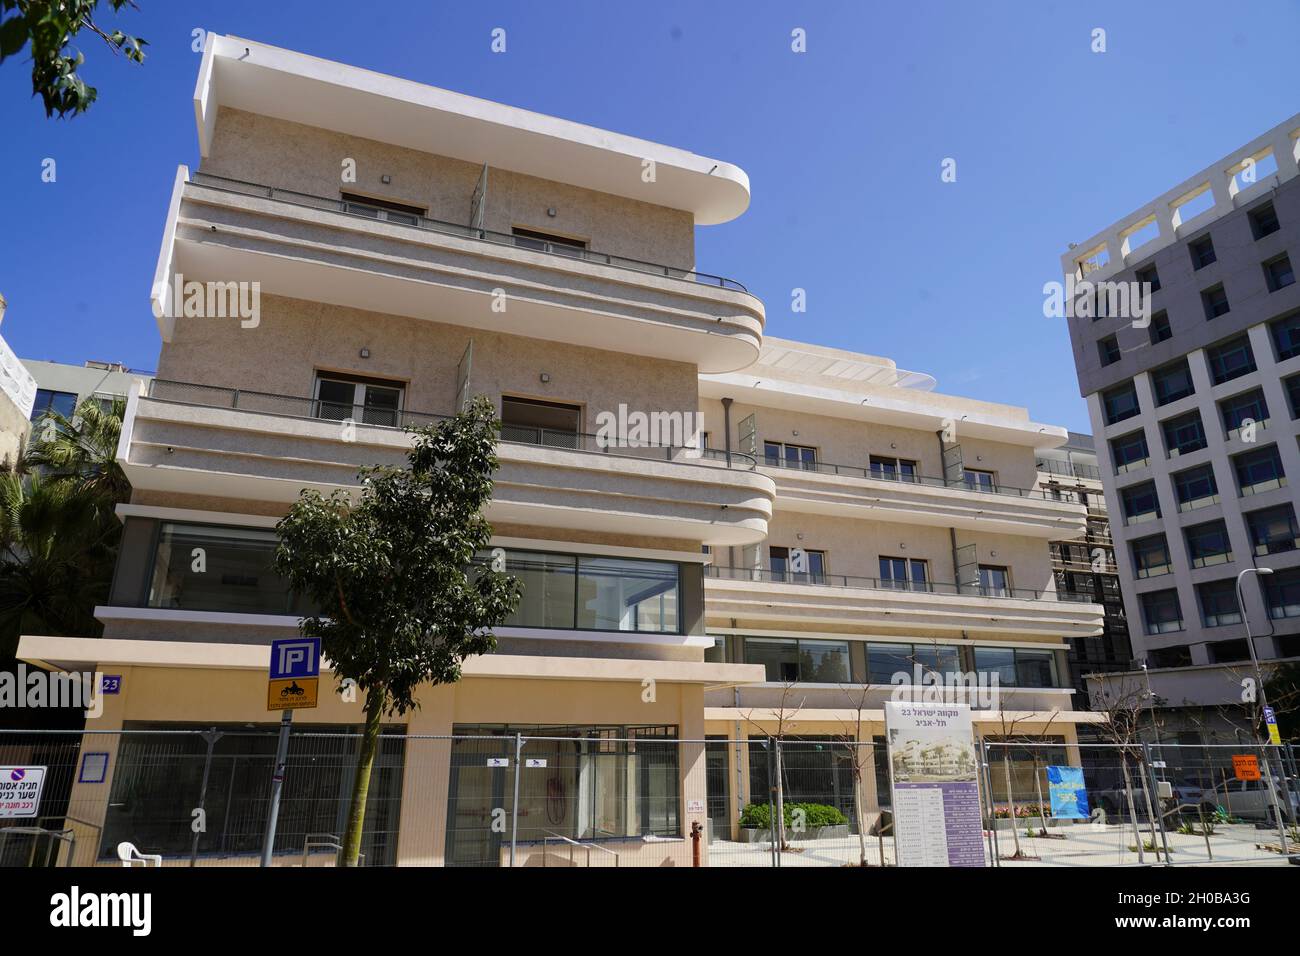 Bauhaus Architecture at Mikve Israel St 23, Tel Aviv White City. The White City refers to a collection of over 4,000 buildings built in the Bauhaus or Stock Photo